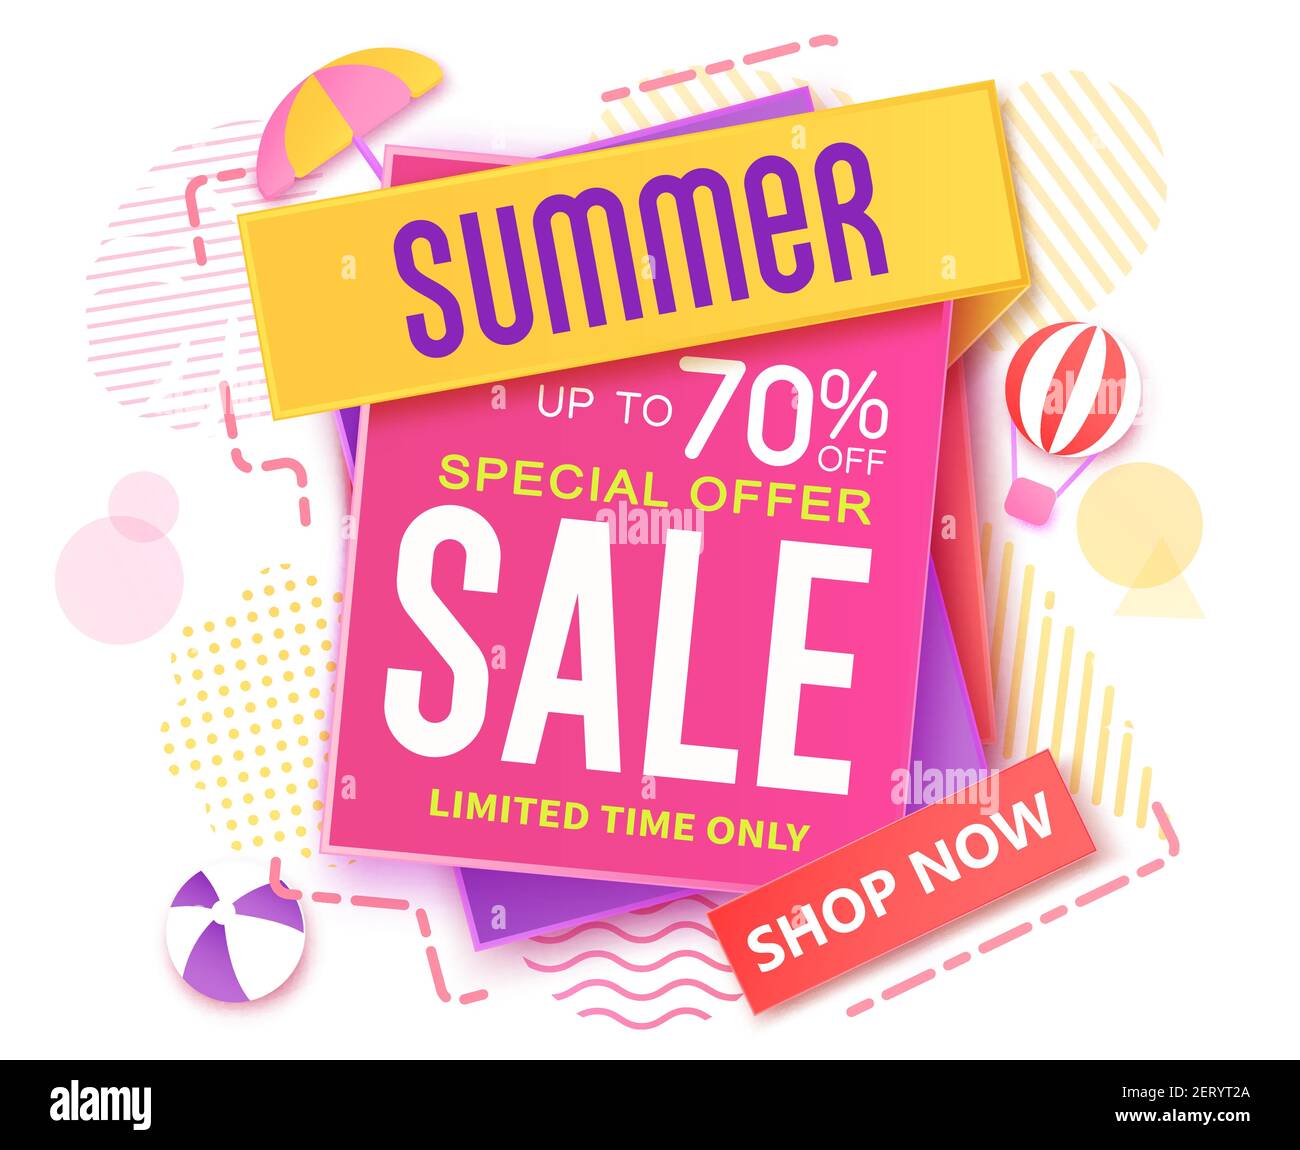 Summer sale vector banner design. Summer sale up to 70% text off shopping offer in paper art and pattern background for tropical season special promo. Stock Vector